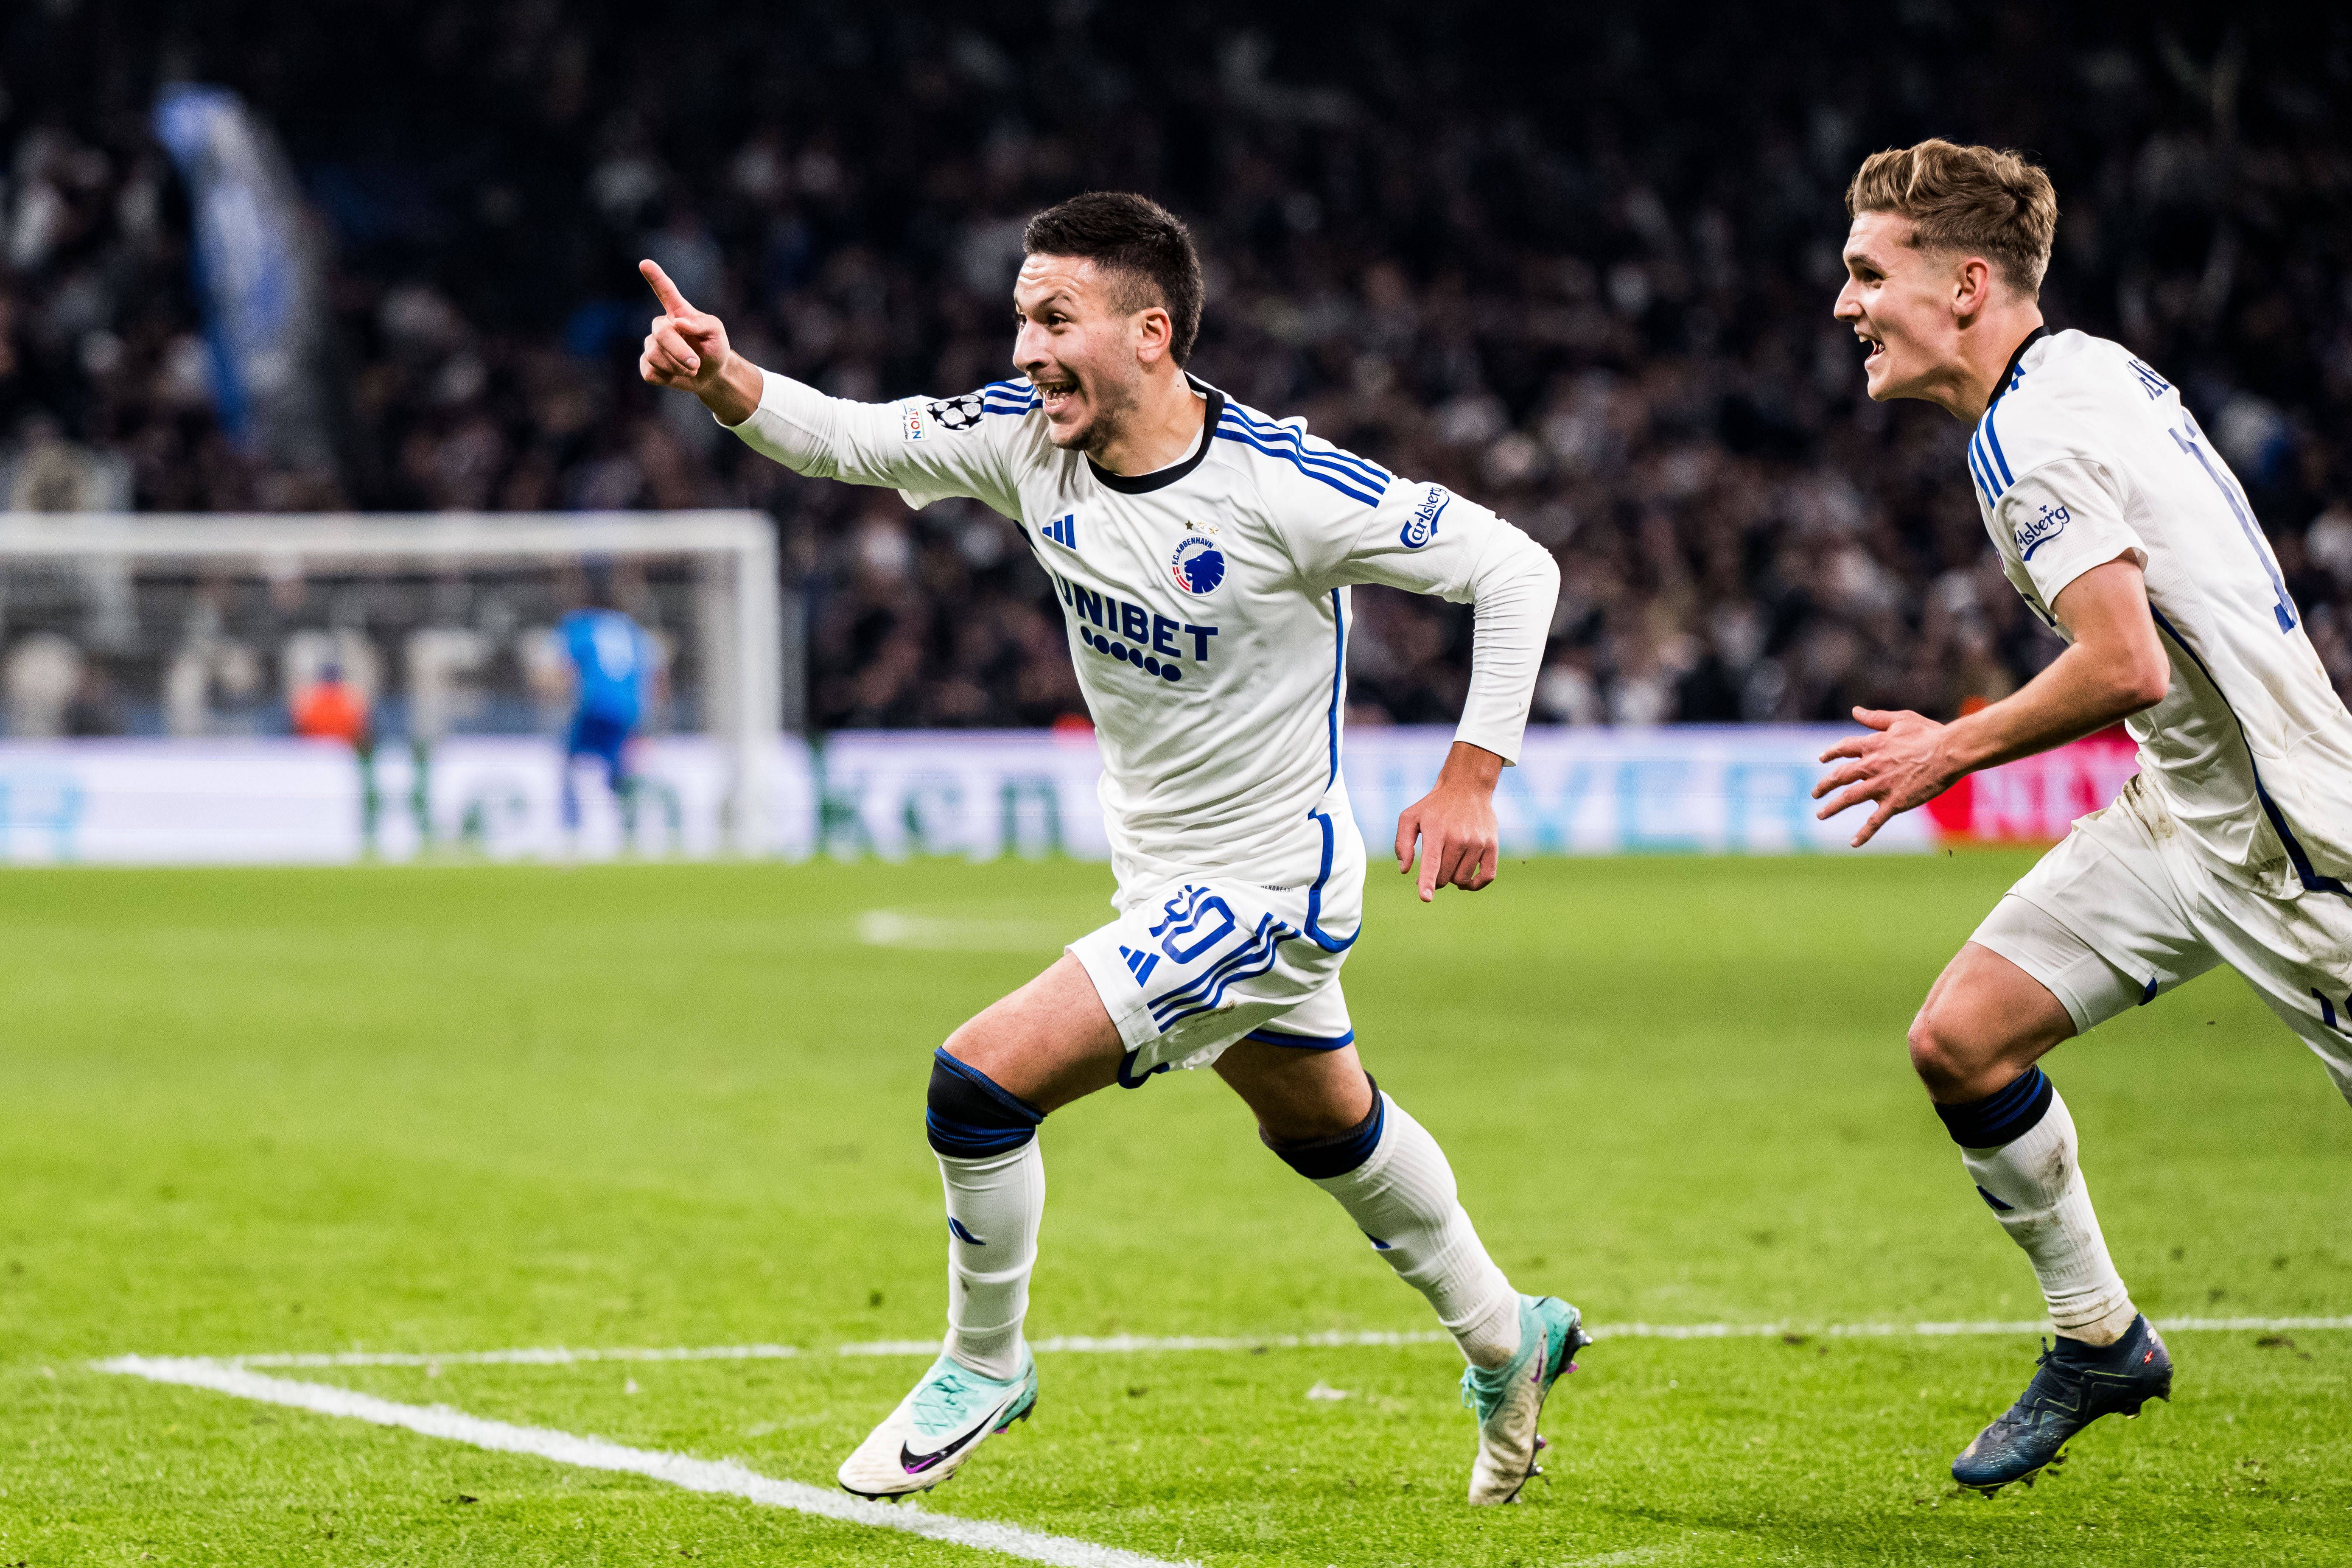 Goals, expulsions and comebacks: Copenhagen beat Manchester United in a crazy match.  Bayern convinces and secures qualification to the round of 16.